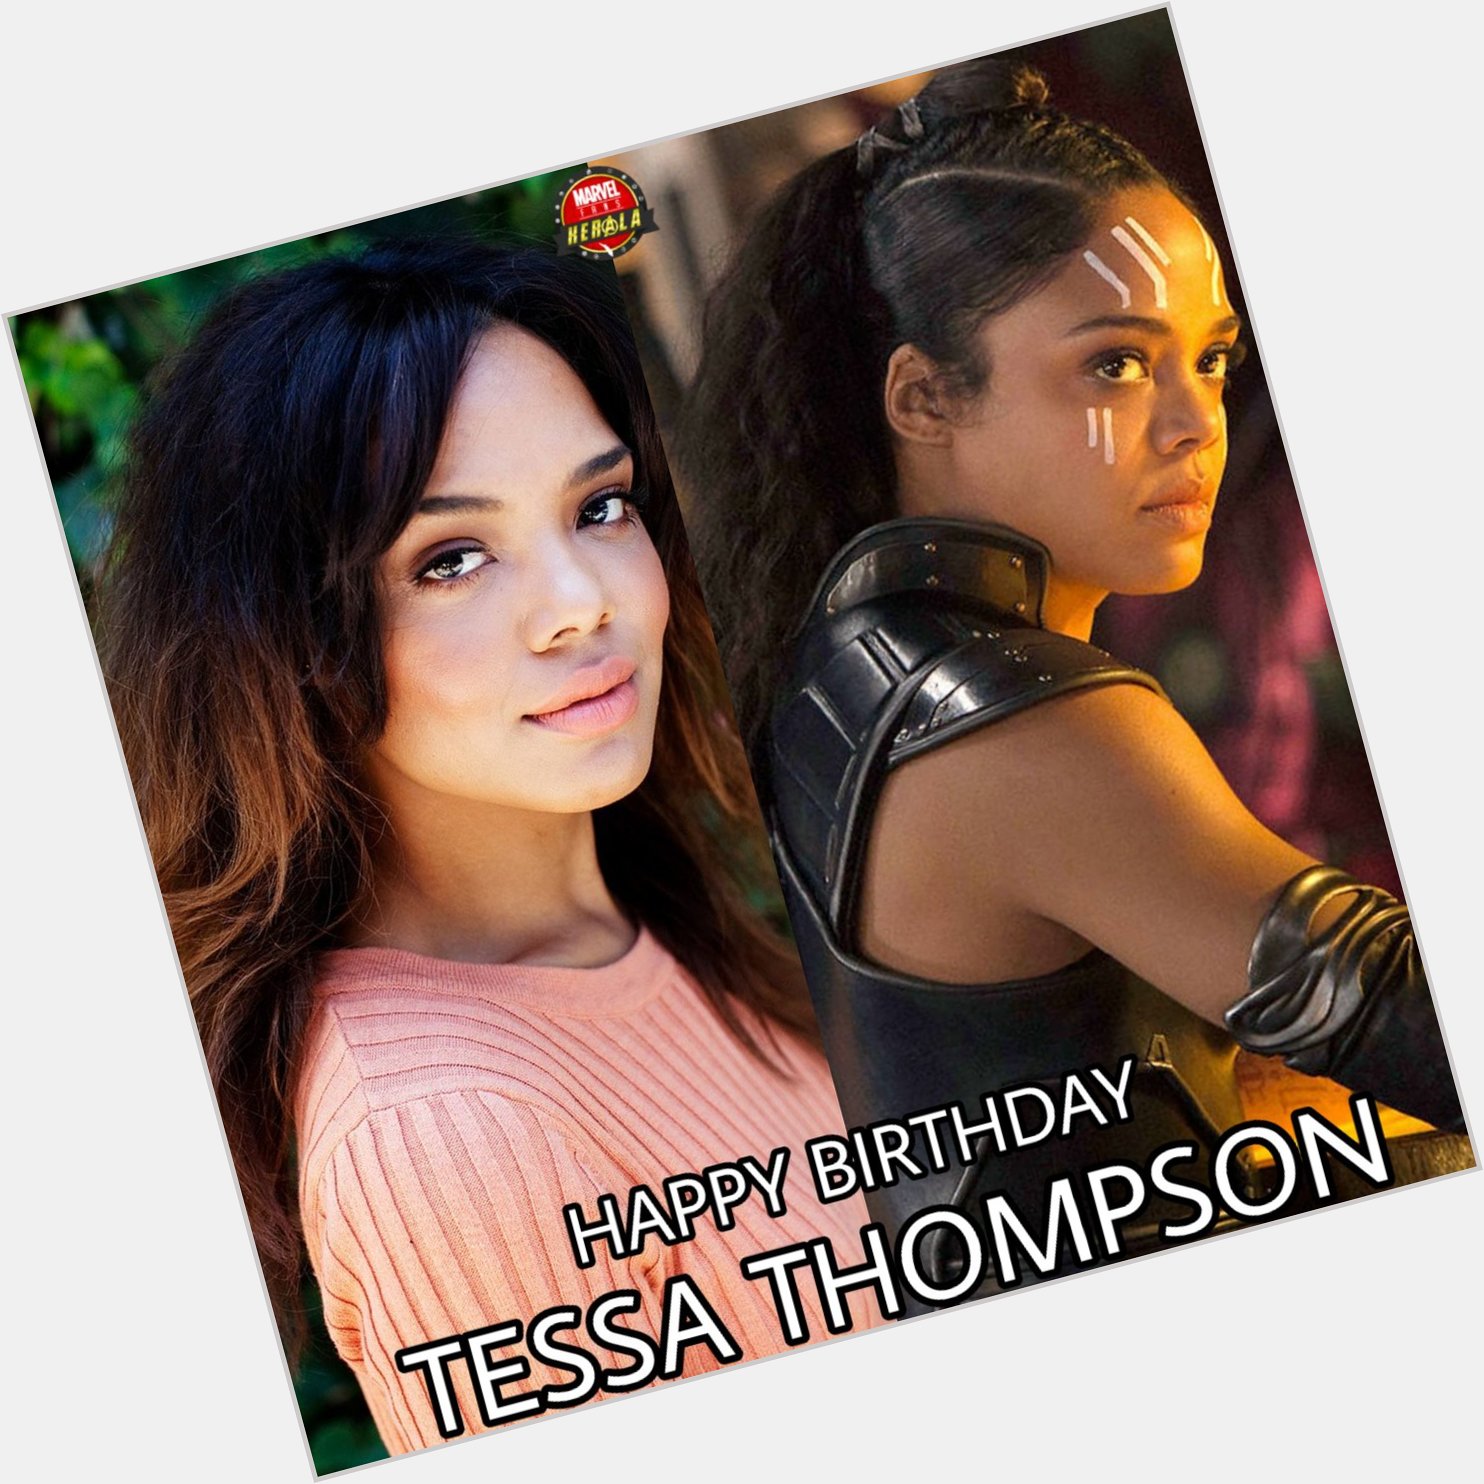 Wishing a very Happy Birthday to Tessa Thompson our Valkyrie       